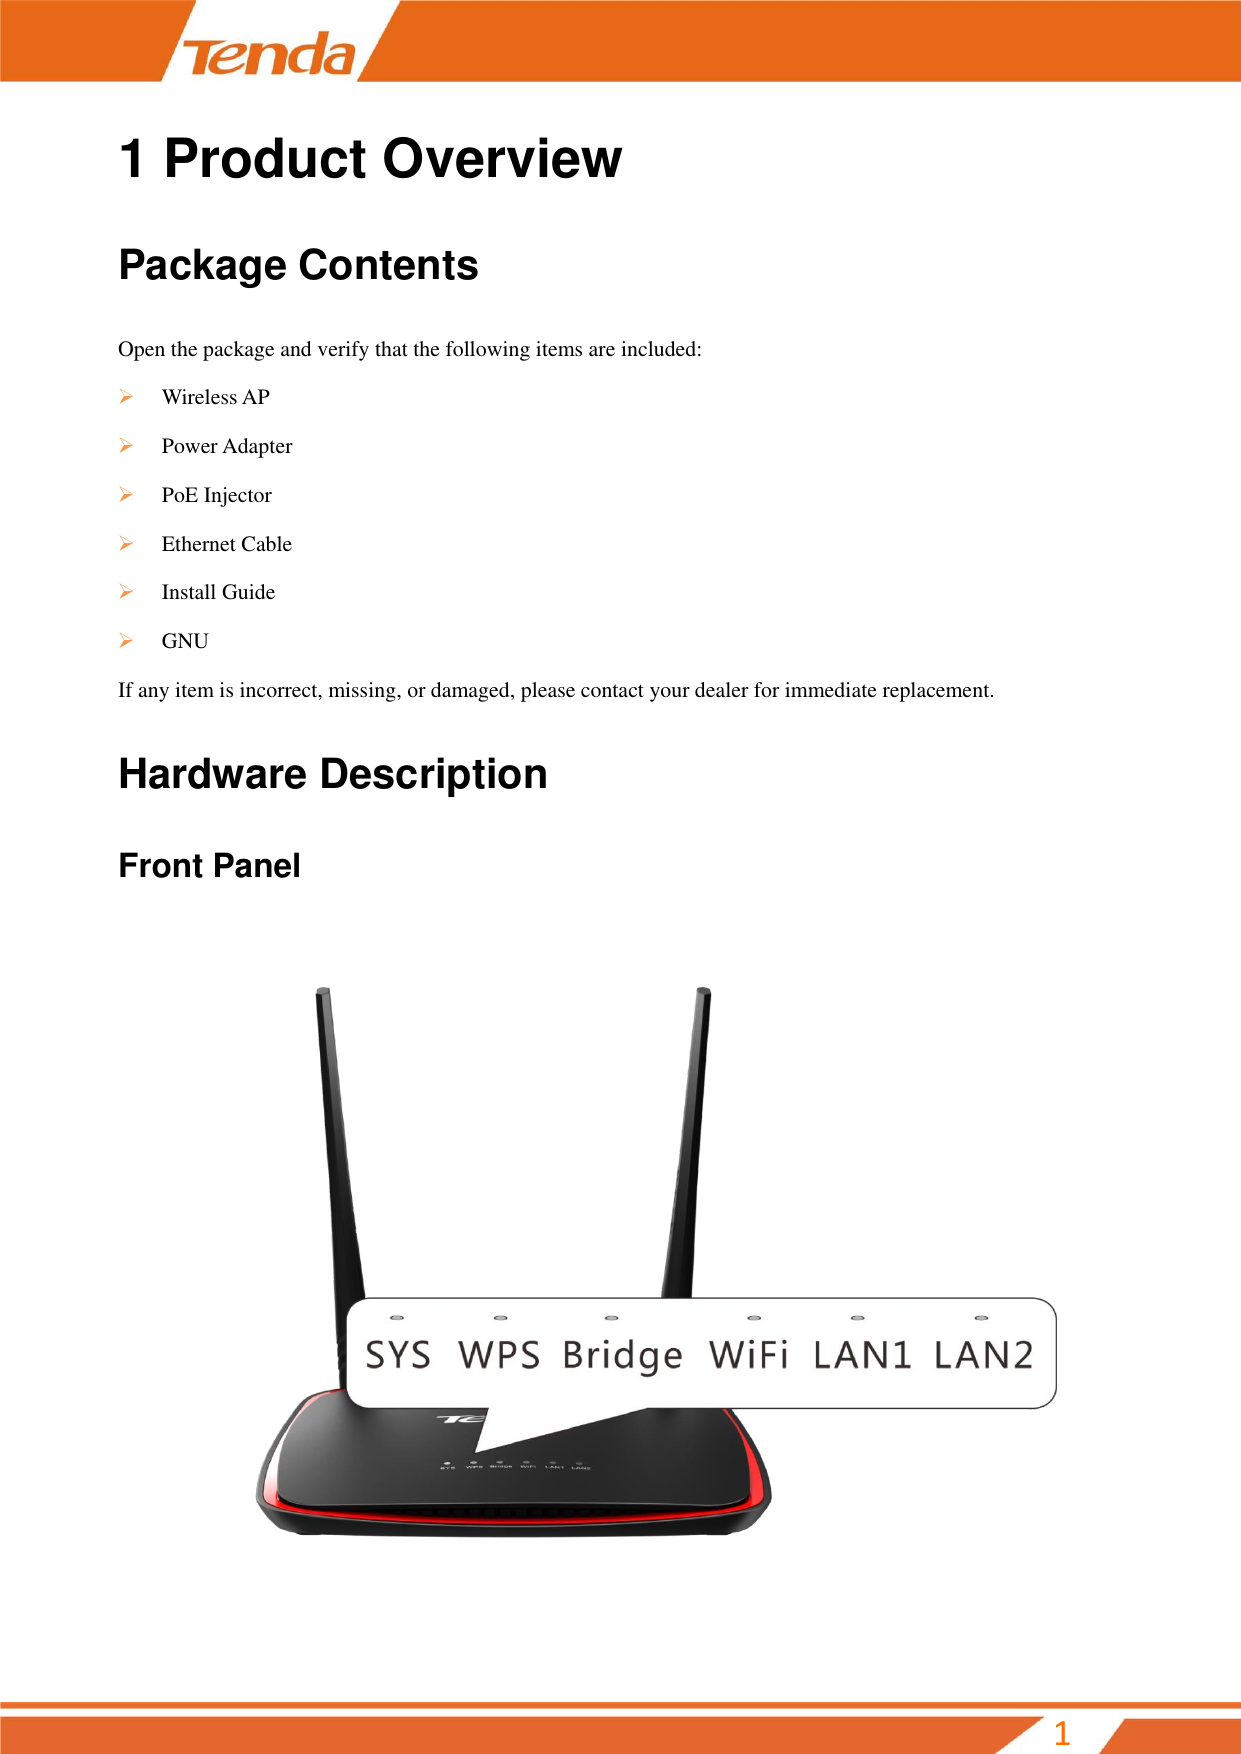         1 1 Product Overview Package Contents Open the package and verify that the following items are included:  Wireless AP  Power Adapter  PoE Injector  Ethernet Cable  Install Guide  GNU If any item is incorrect, missing, or damaged, please contact your dealer for immediate replacement. Hardware Description   Front Panel  